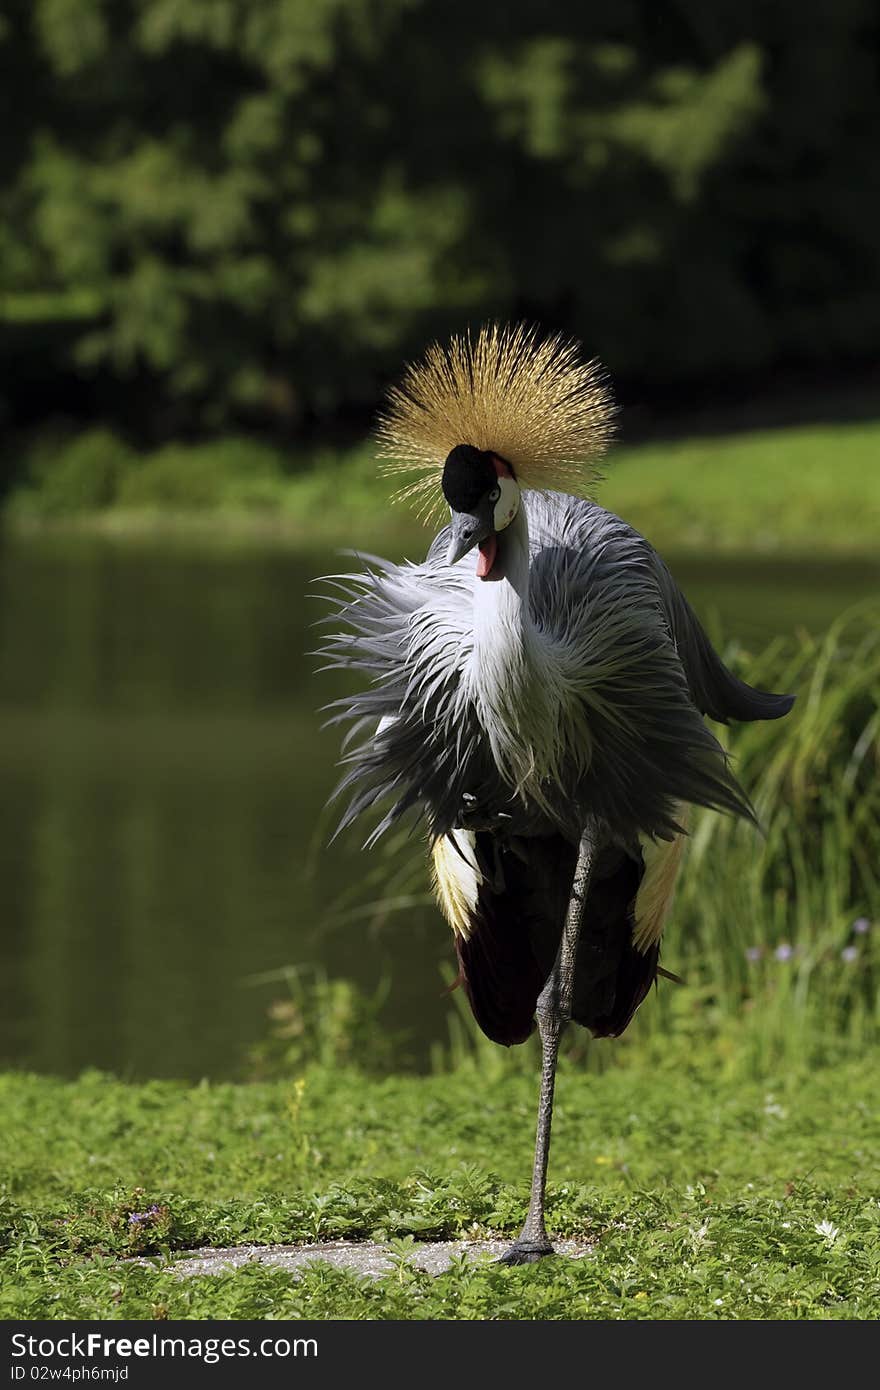 A crown crane shot in central europe